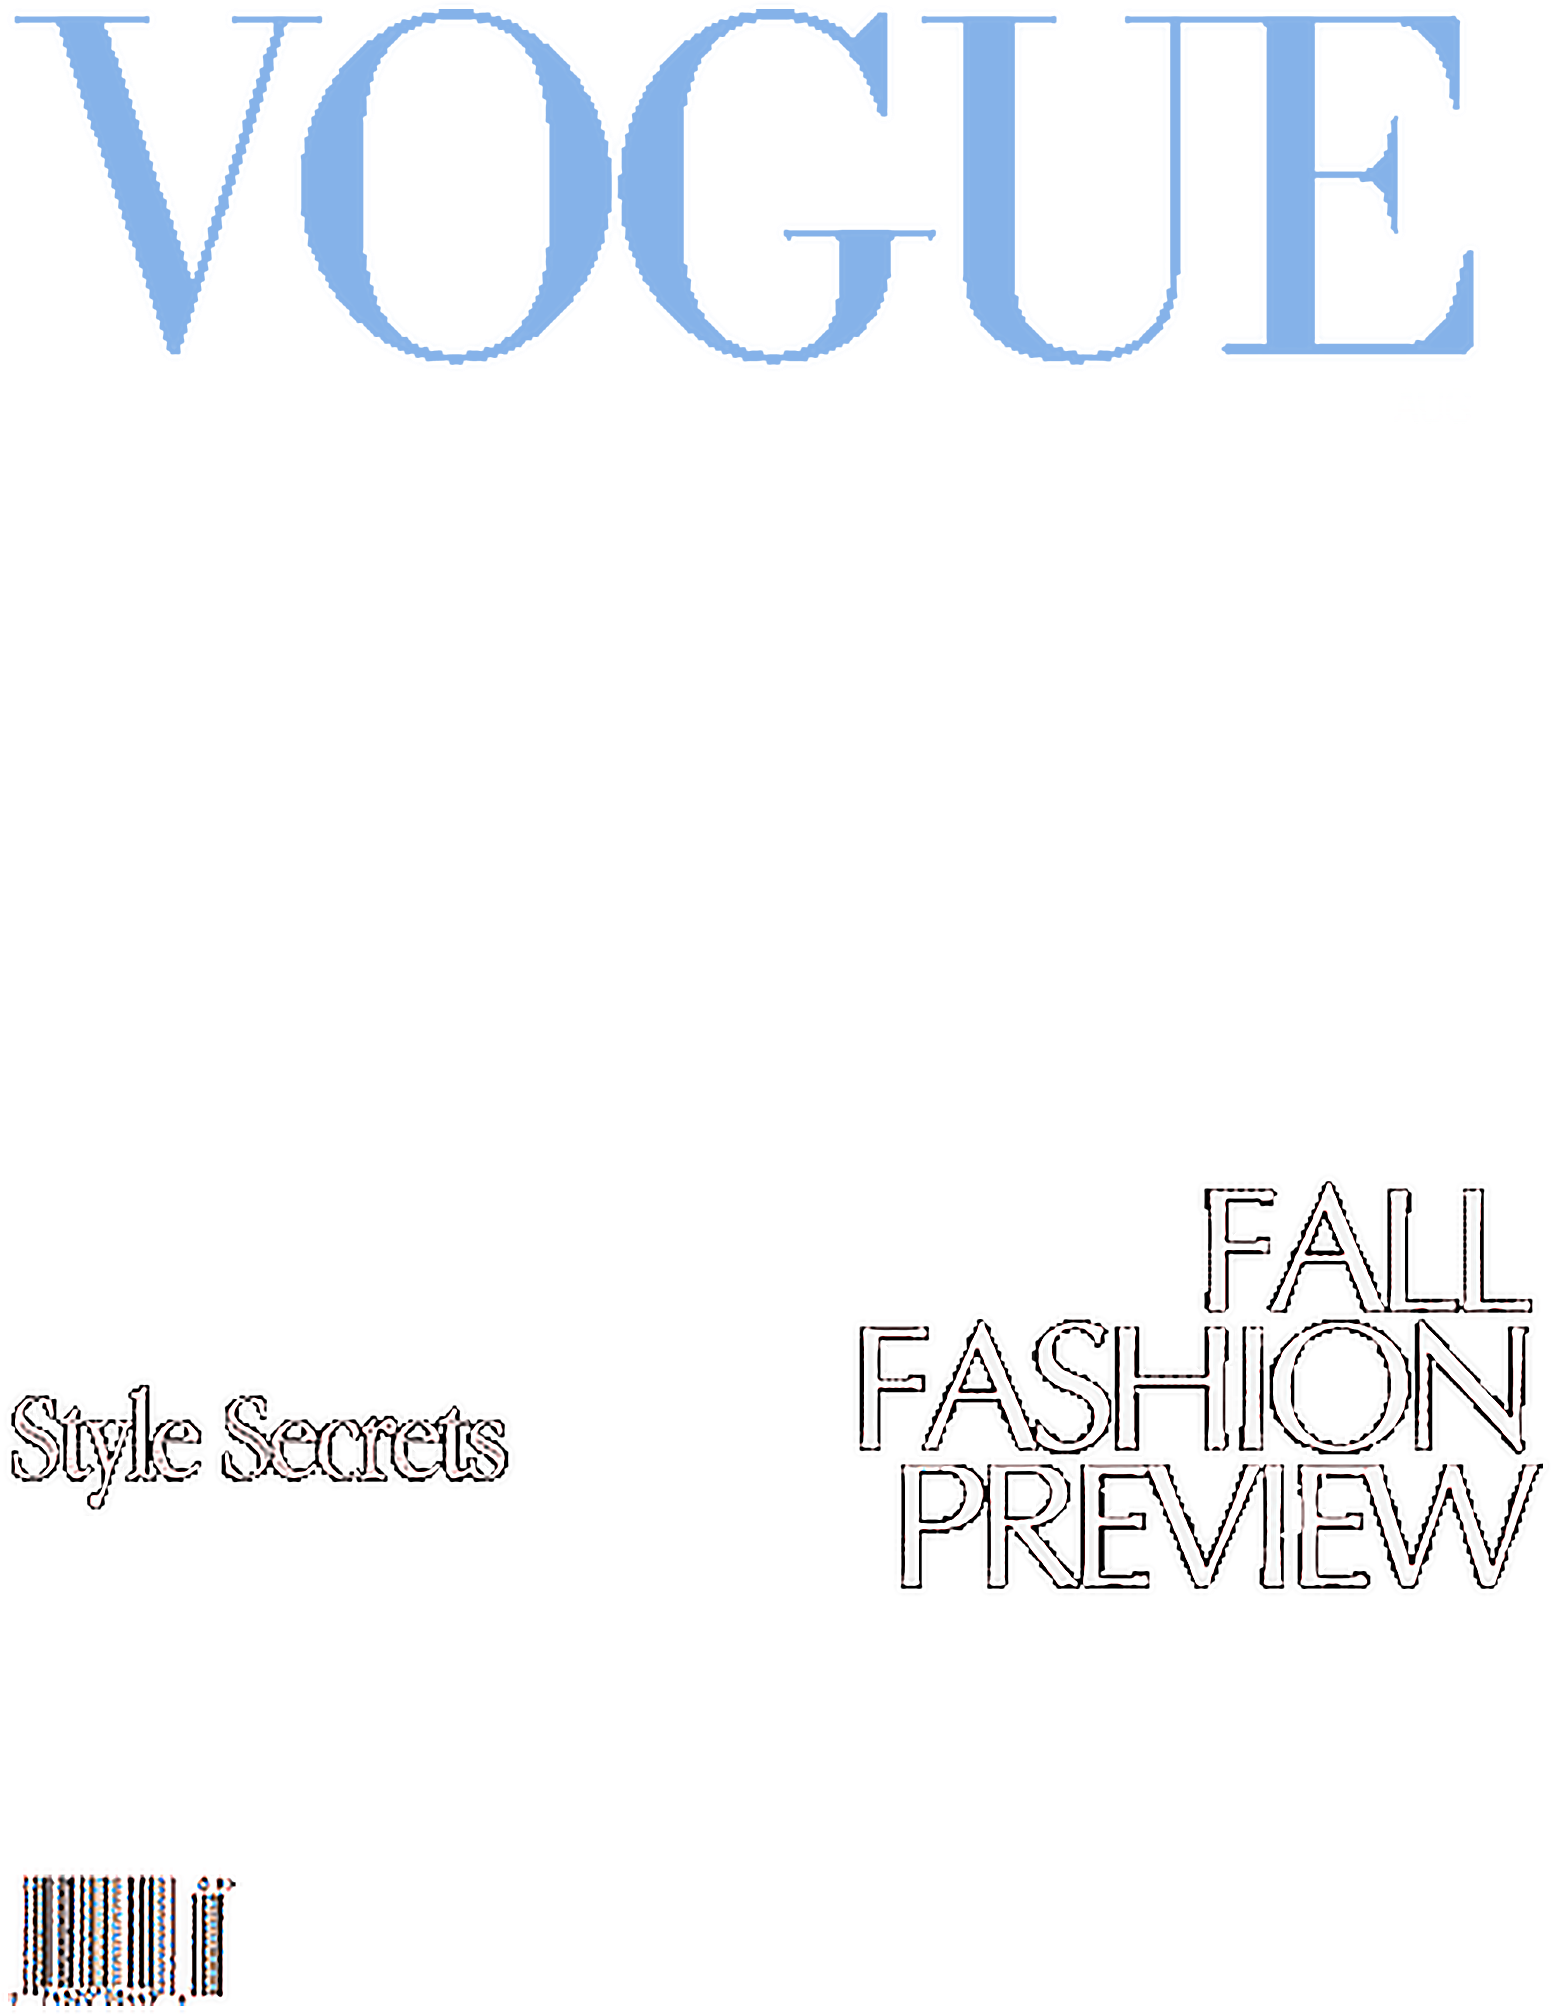 Create A Magazine Cover With An Image Of Your Own Vogue Magazine